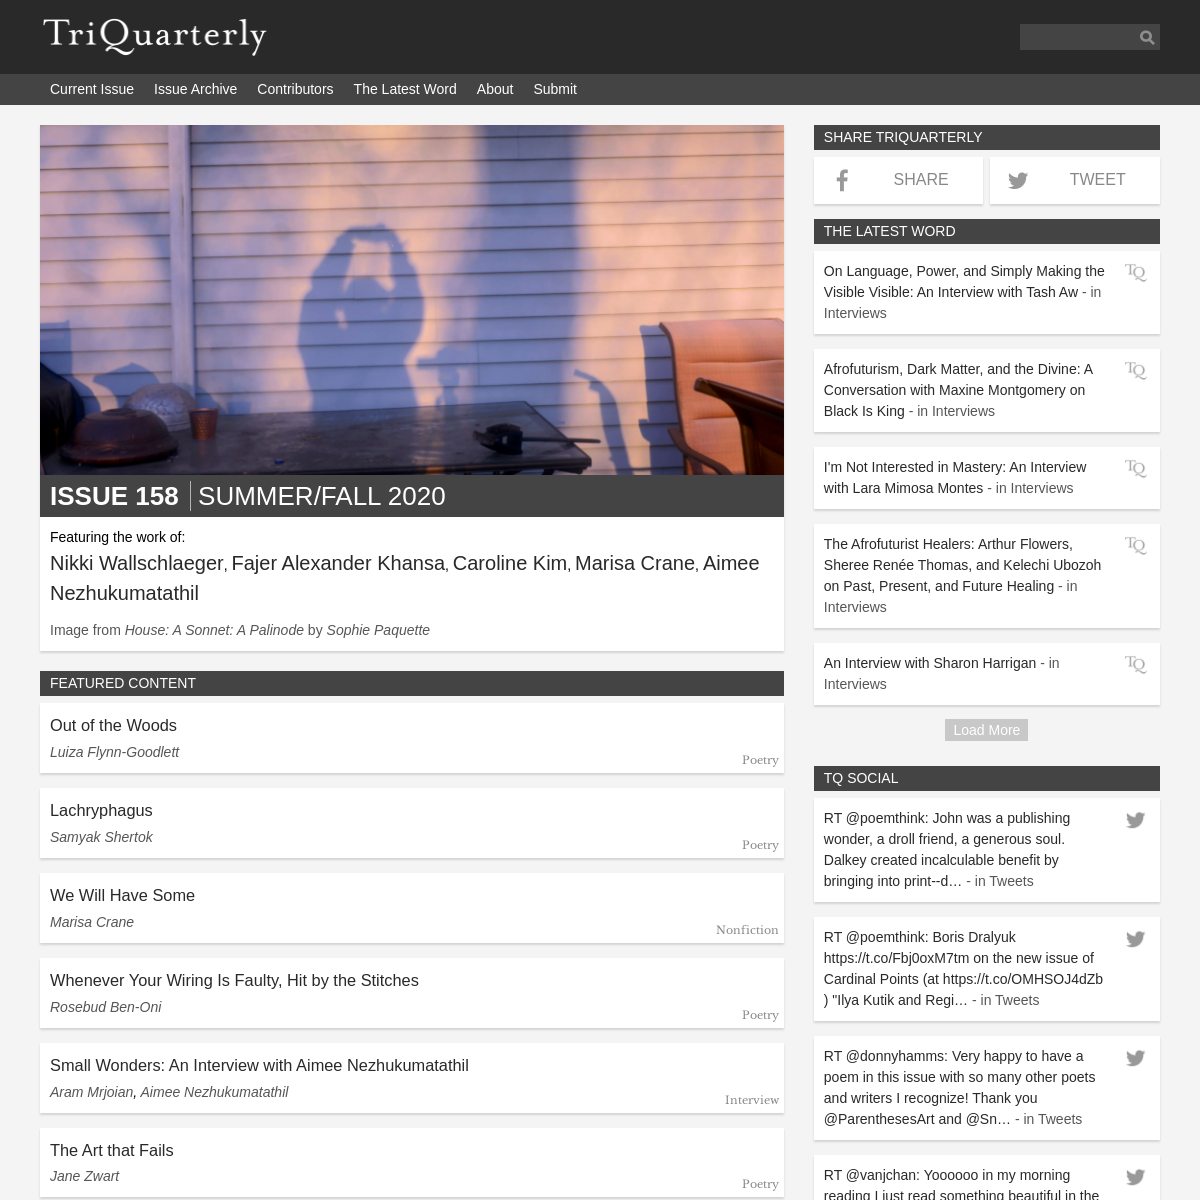 A complete backup of triquarterly.org